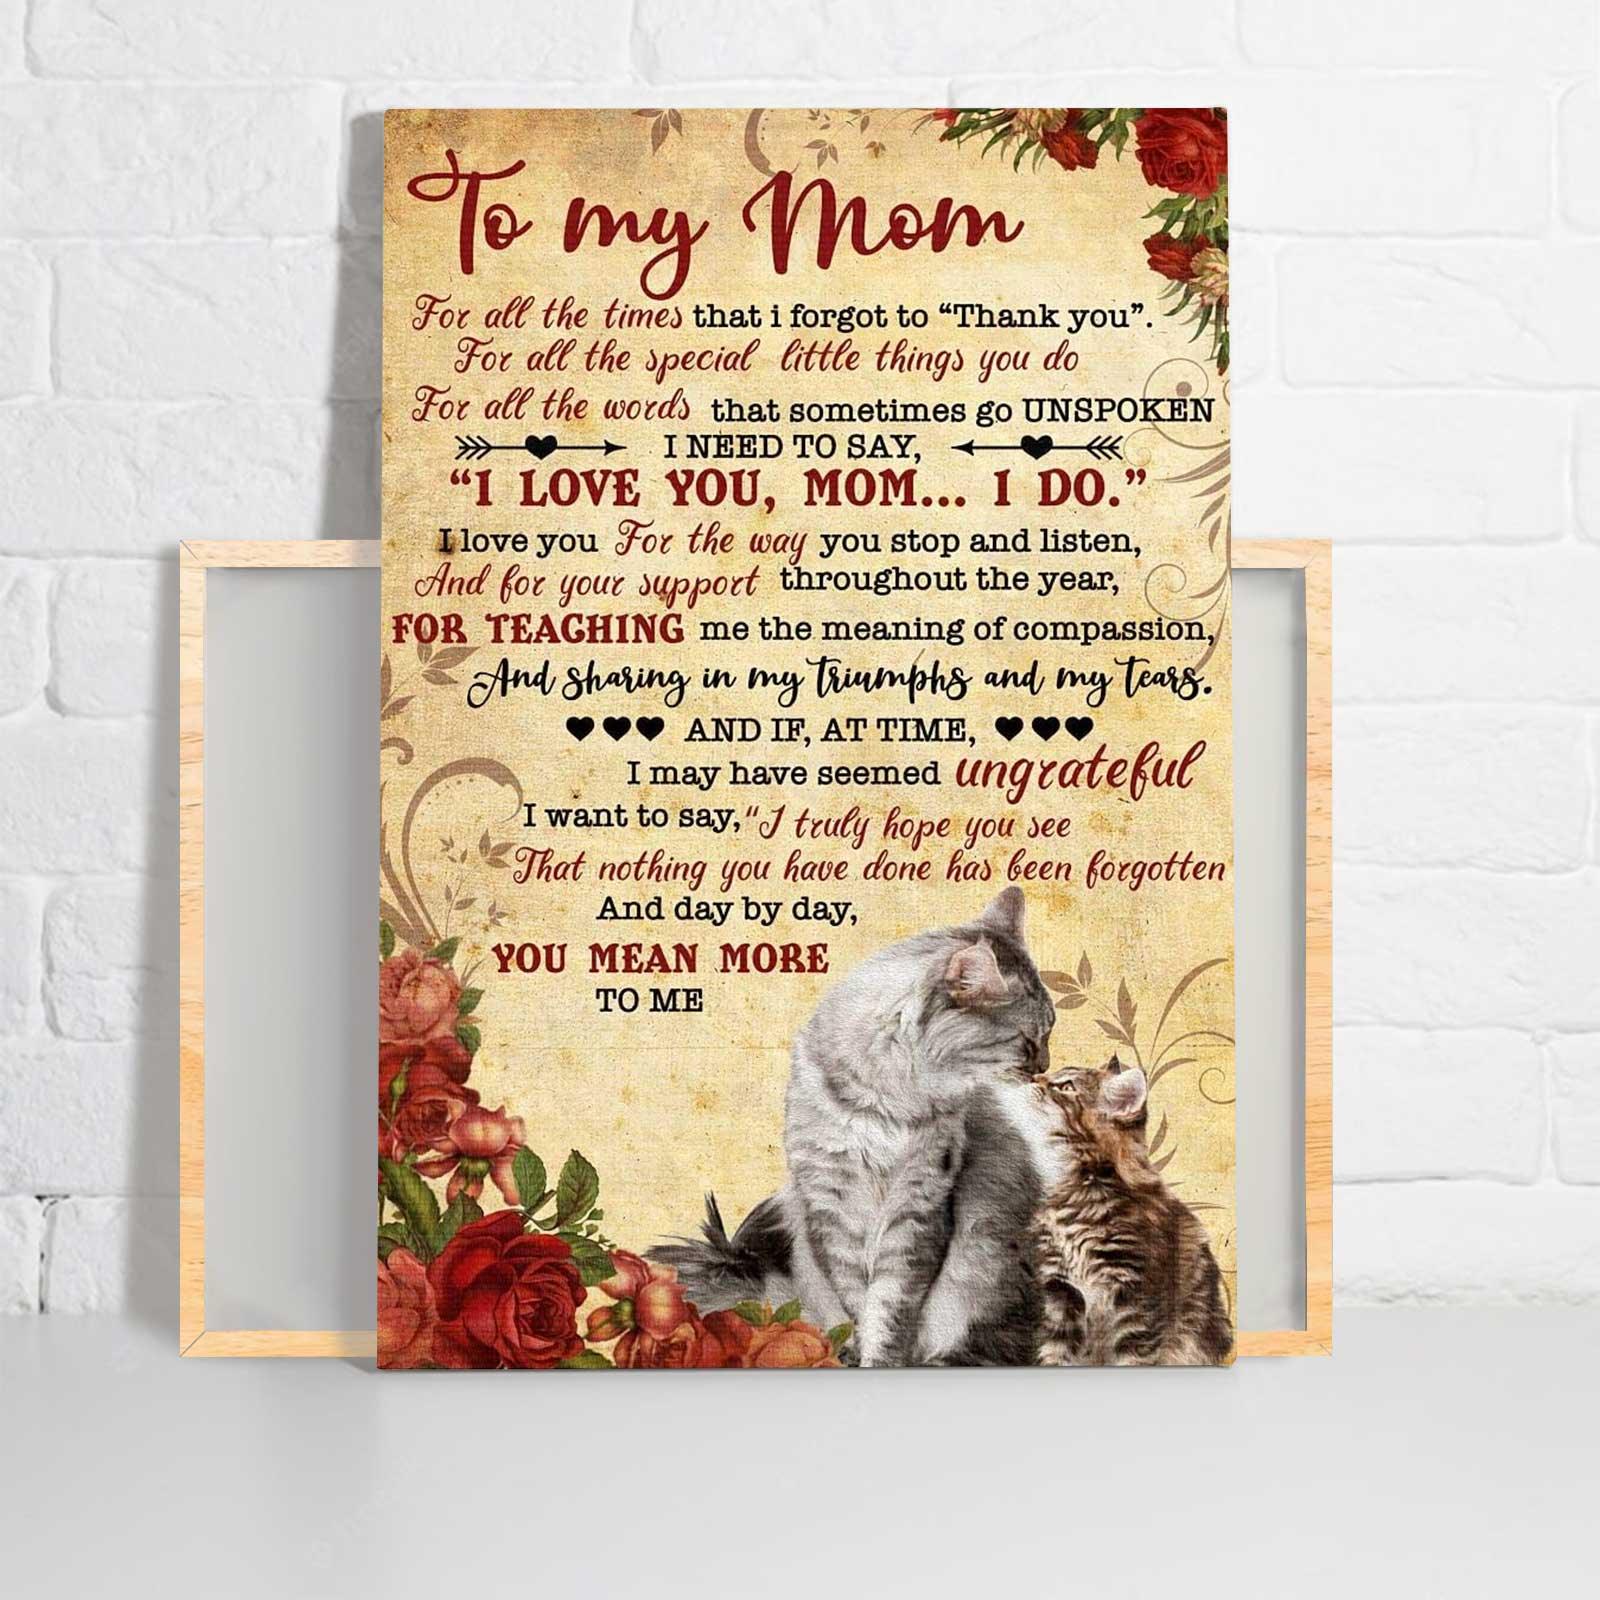 Cat Portrait Canvas To Mom - For All The Times That I Forgot To Thank You Canvas - Perfect Gift For Cat Lover, Friend, Family - Amzanimalsgift